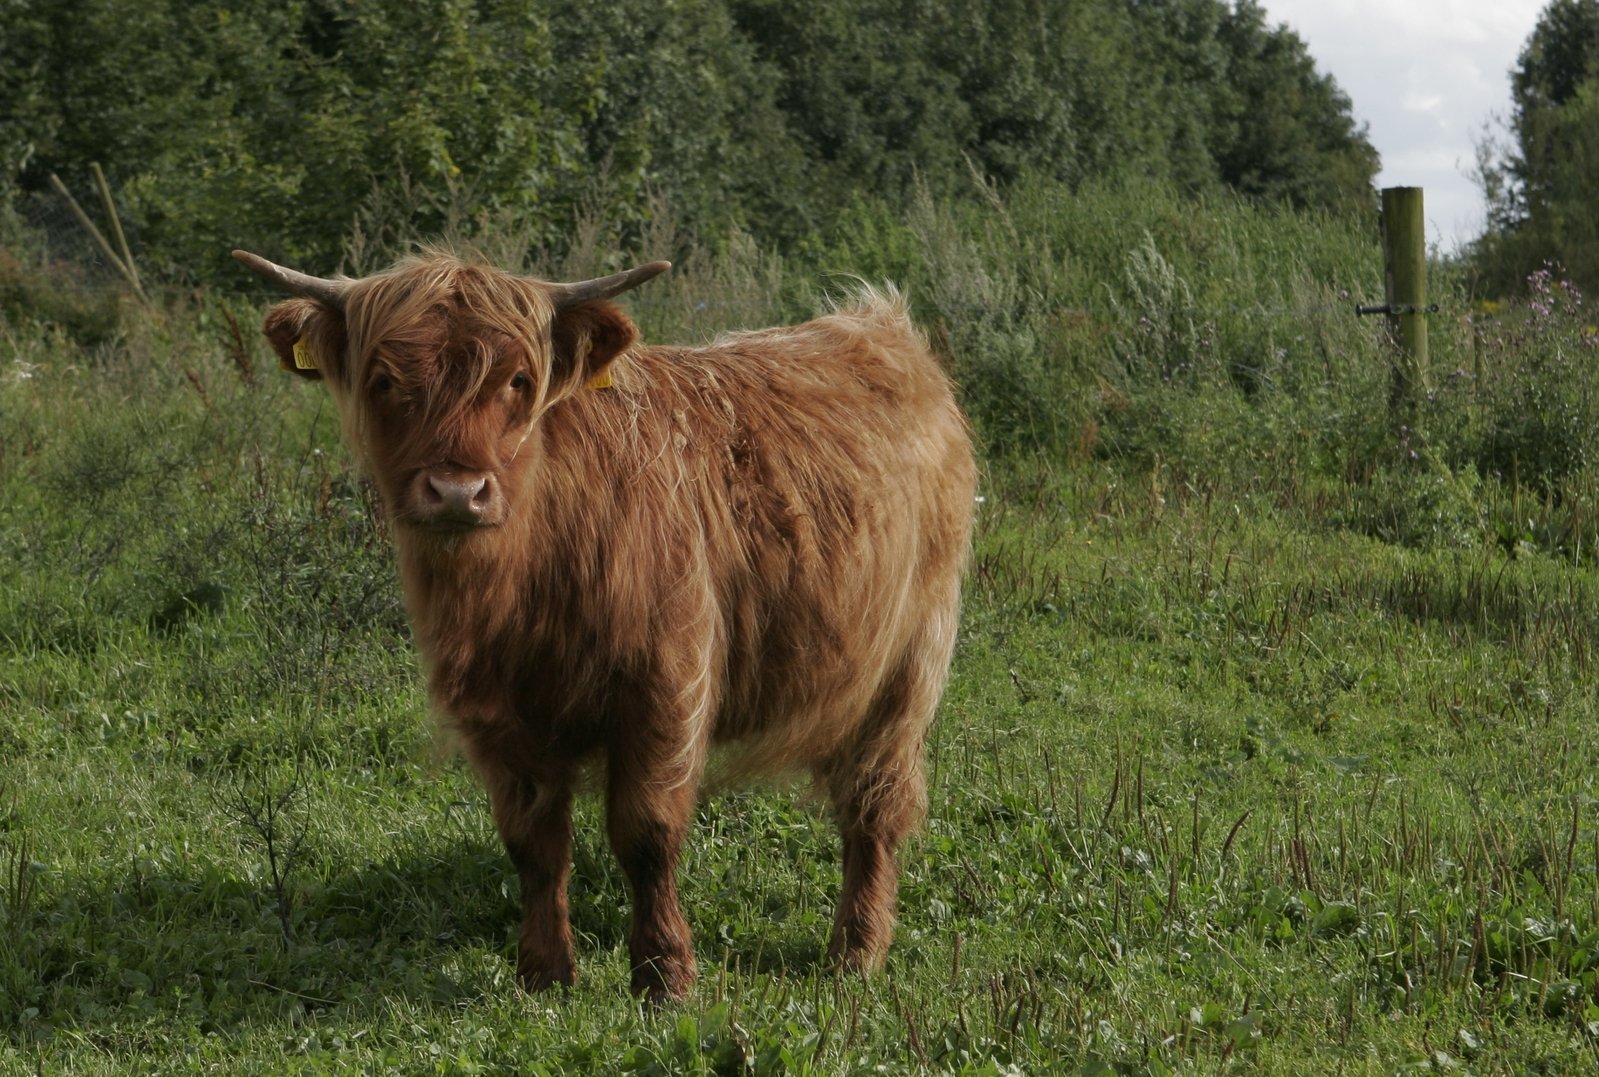 a brown cow standing in a grassy field